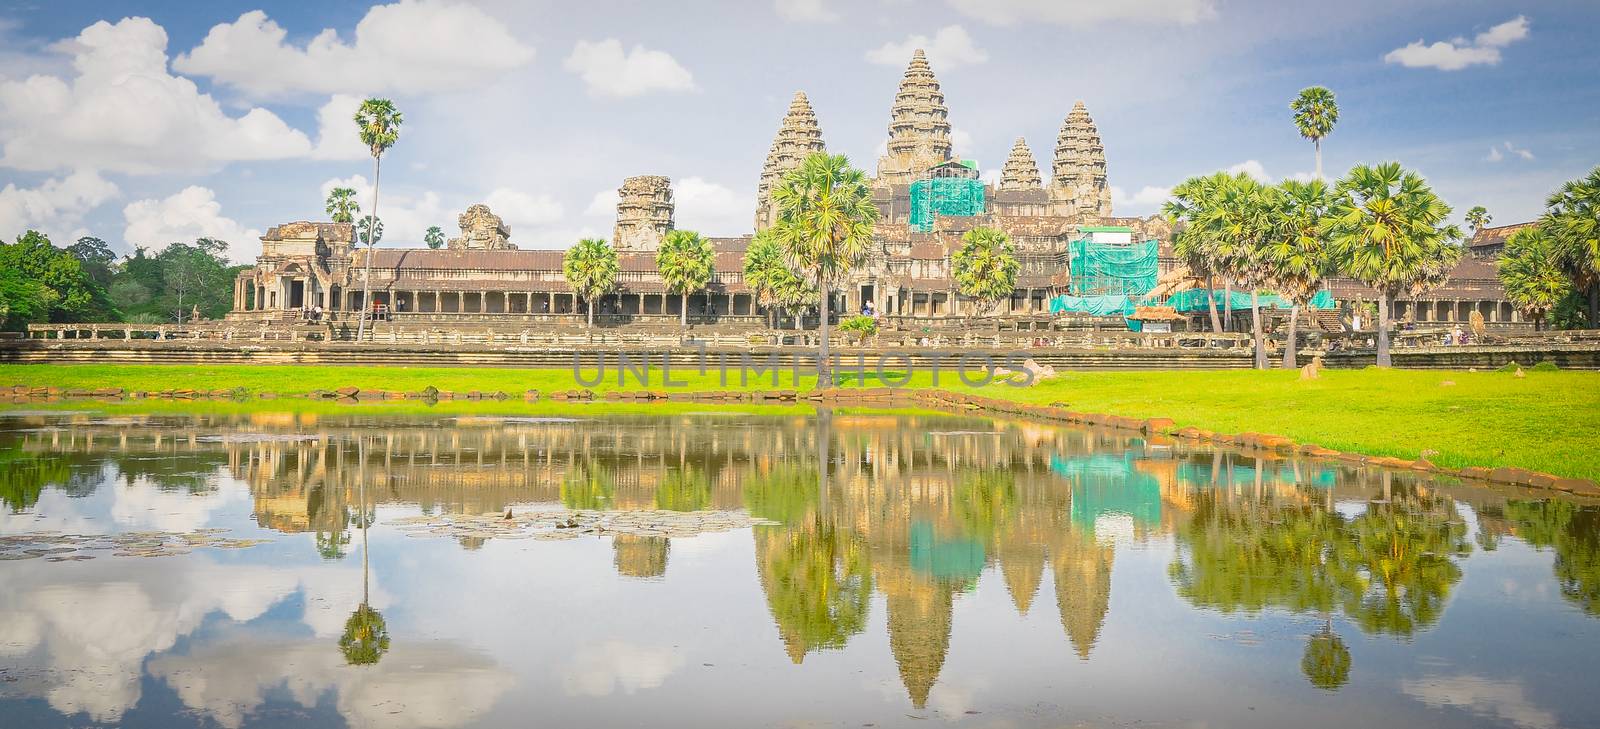 Reflection of Angkor Wat temple complex in Cambodia against cloud sky by trongnguyen